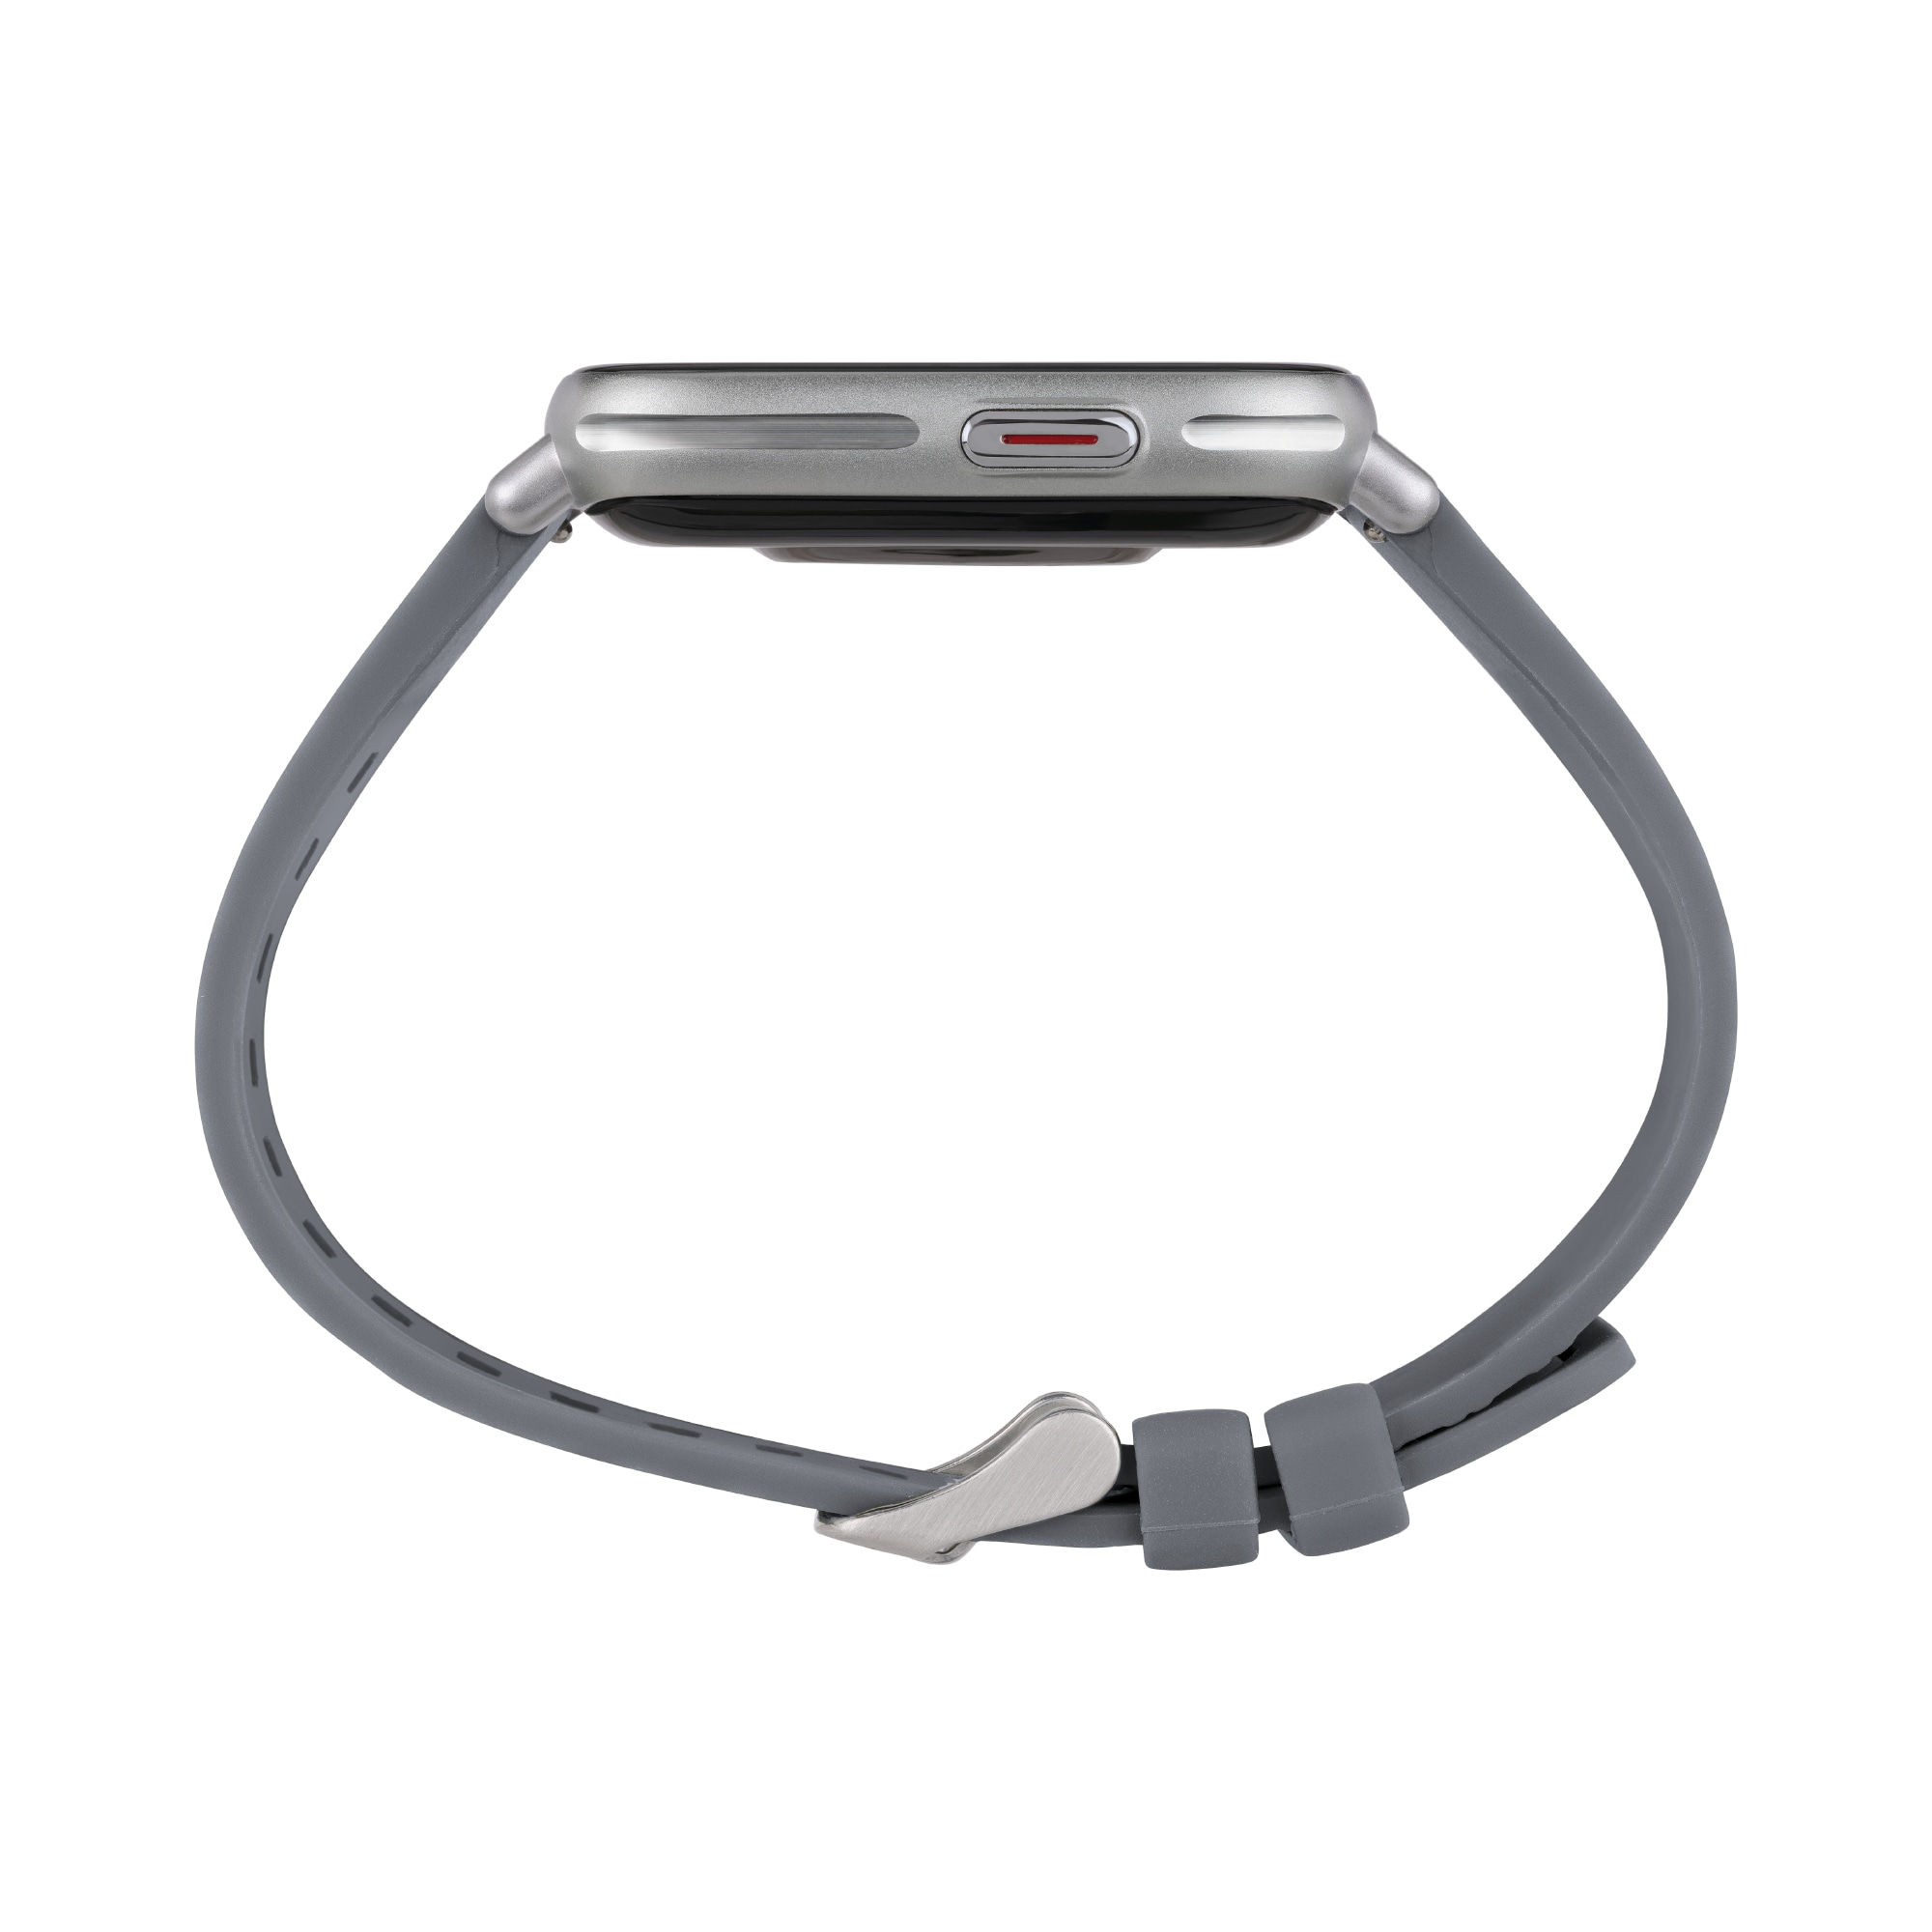 SBT-1 - SMARTWATCH WITH DOUBLE STRAP AND SILVER CASE - 4 - EW0605 | Breil